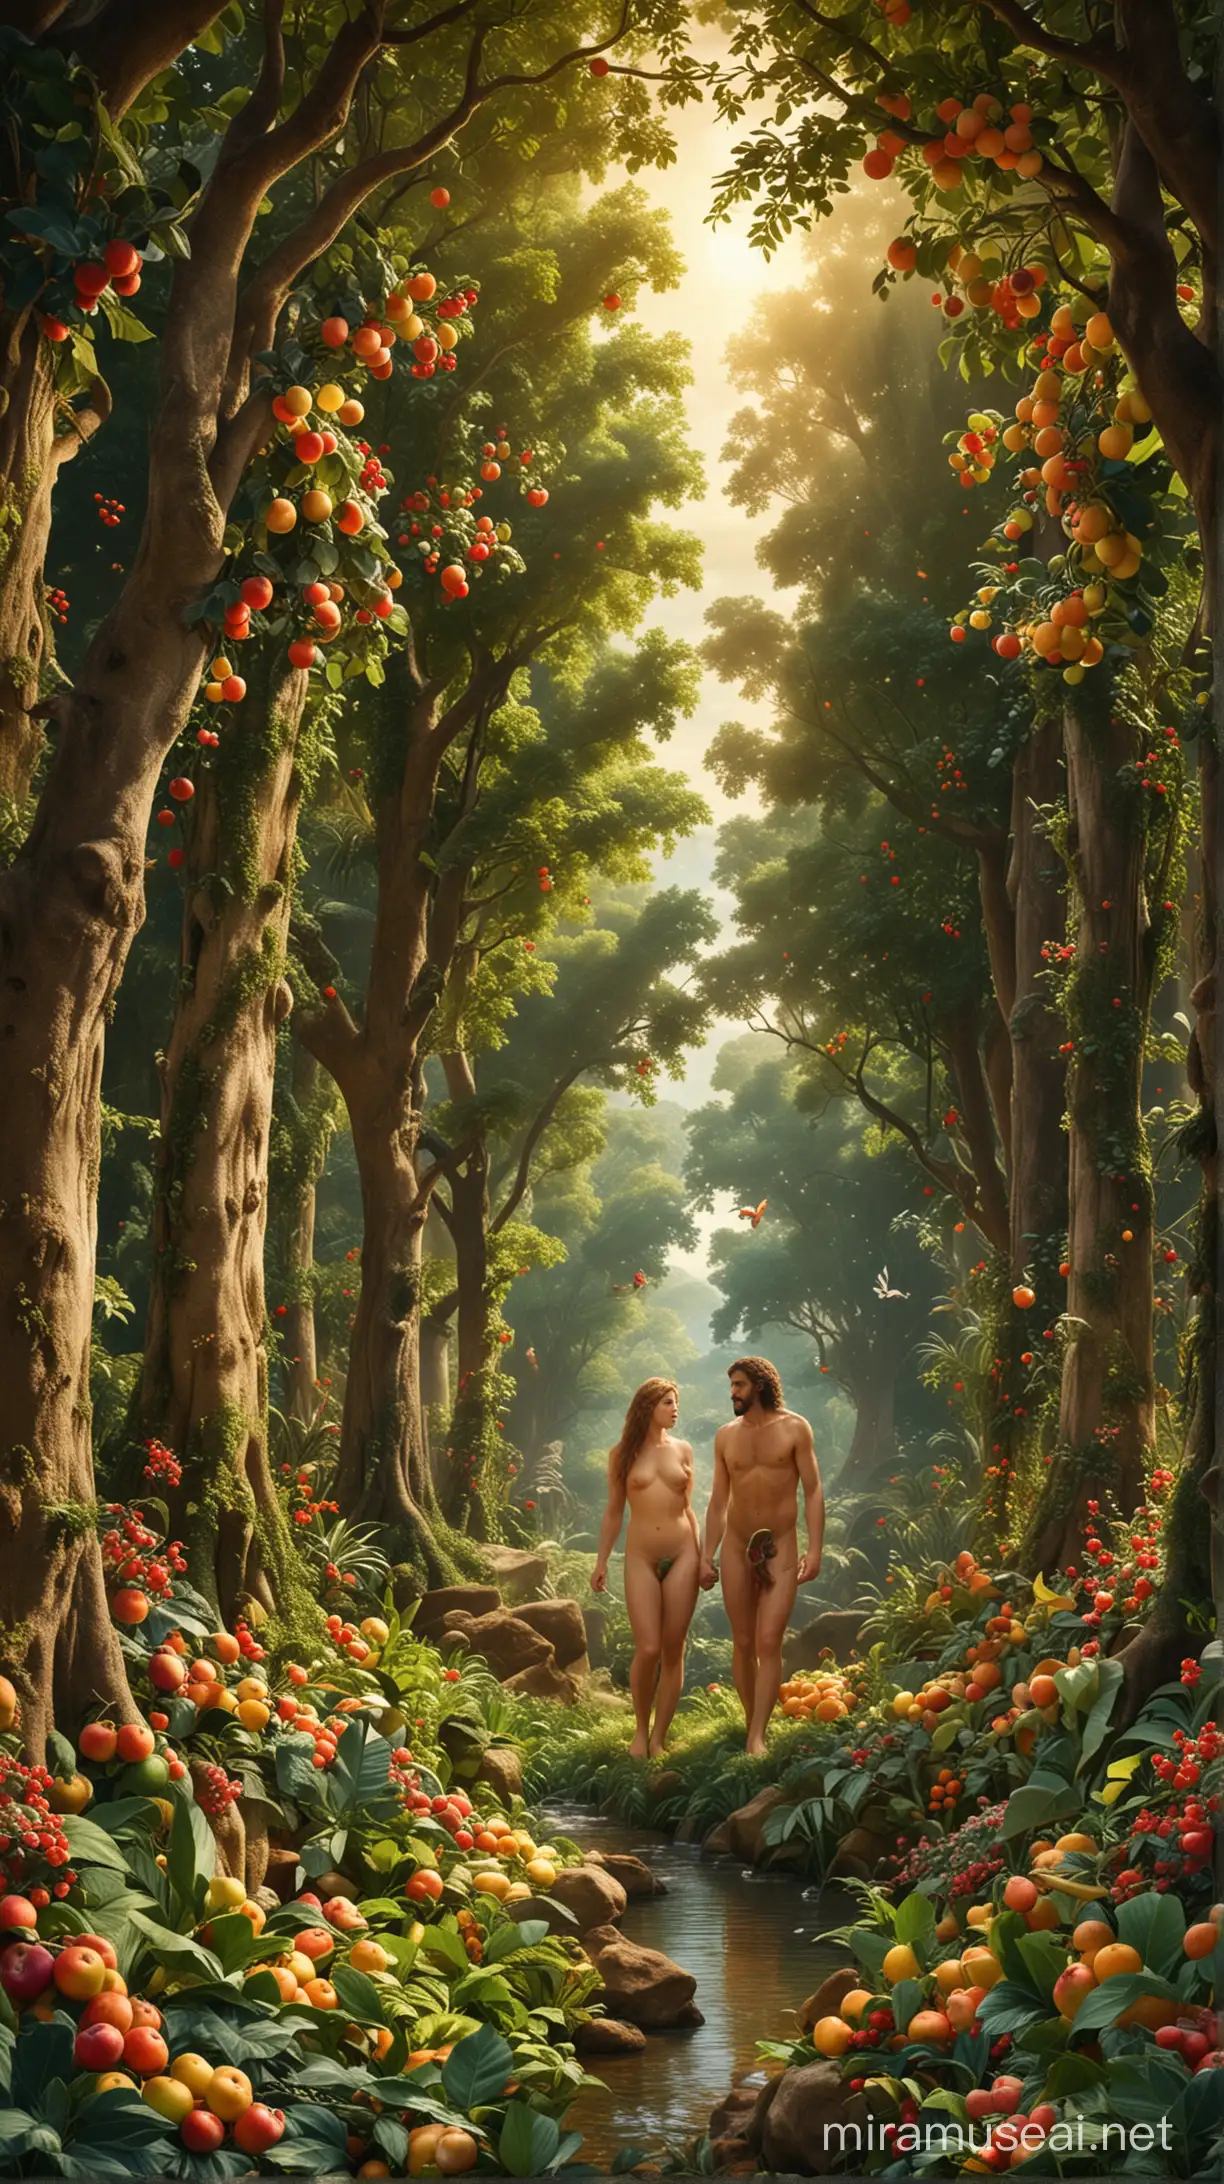 Generate an image depicting the serene garden of Eden before the fall of man, with Adam and Eve surrounded by lush greenery and bountiful fruit in ancient world 